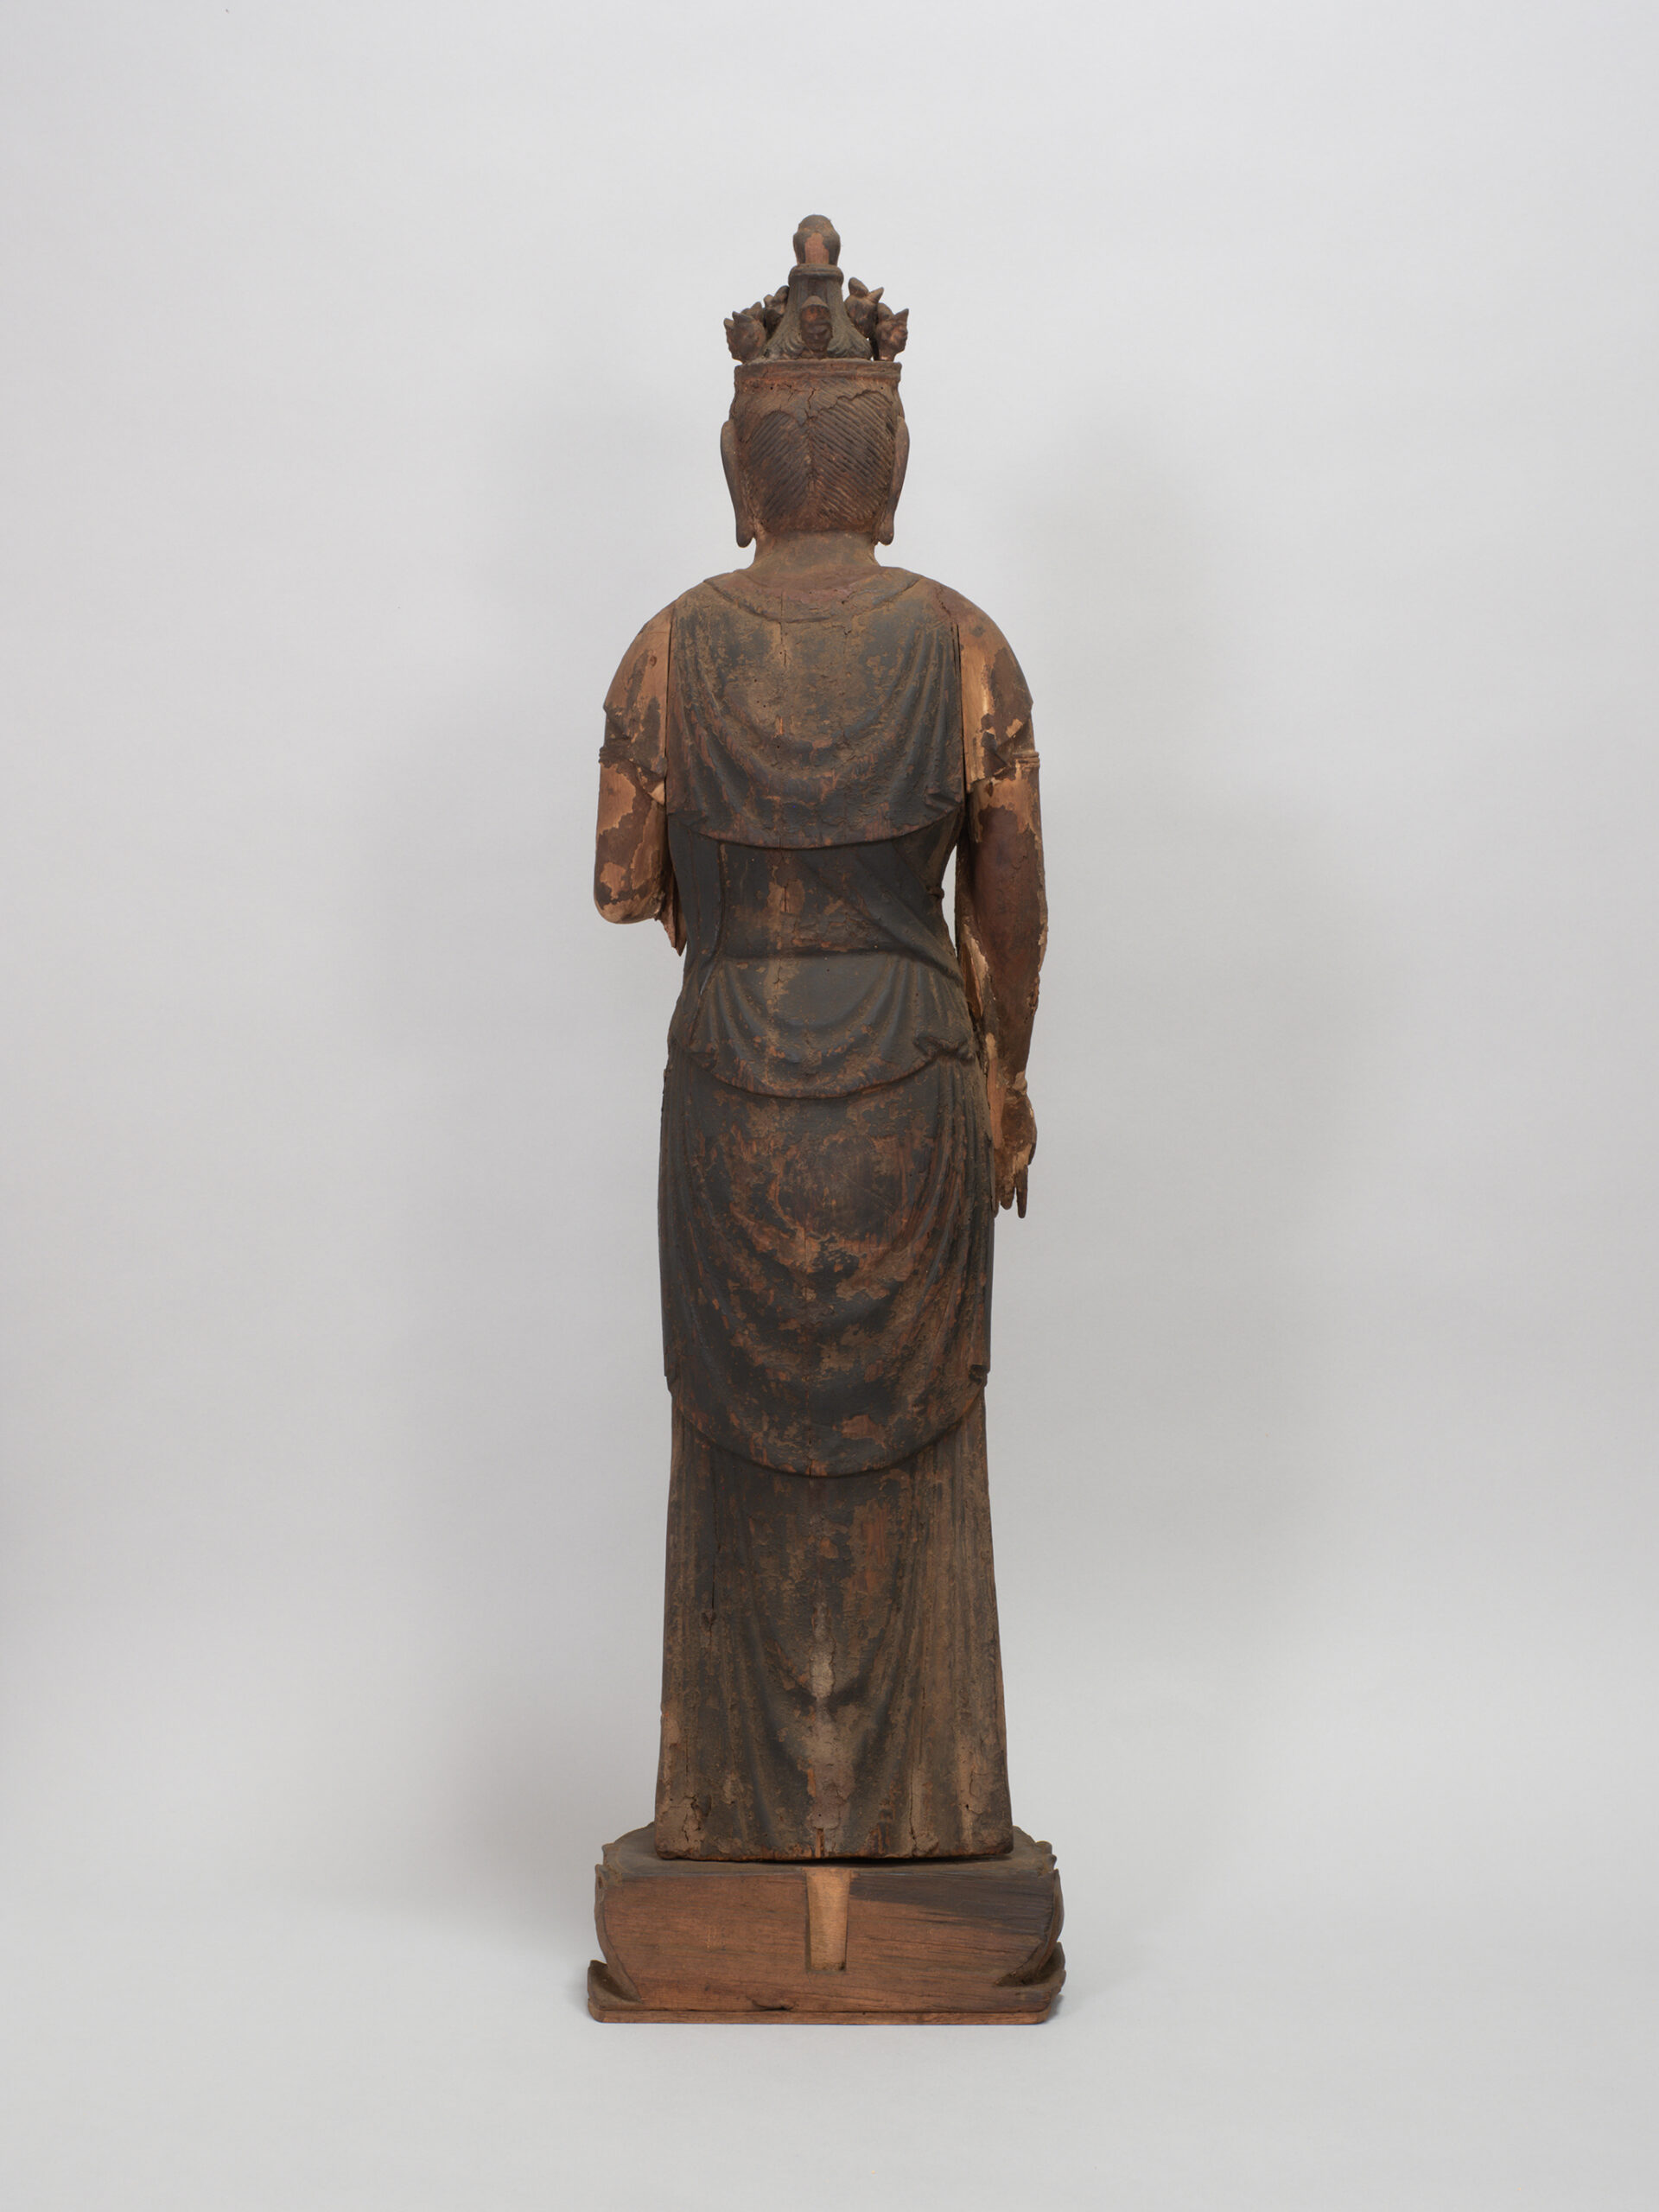 The Wooden Standing Statue of the Eleven-faced Kannon Bodhisattva_